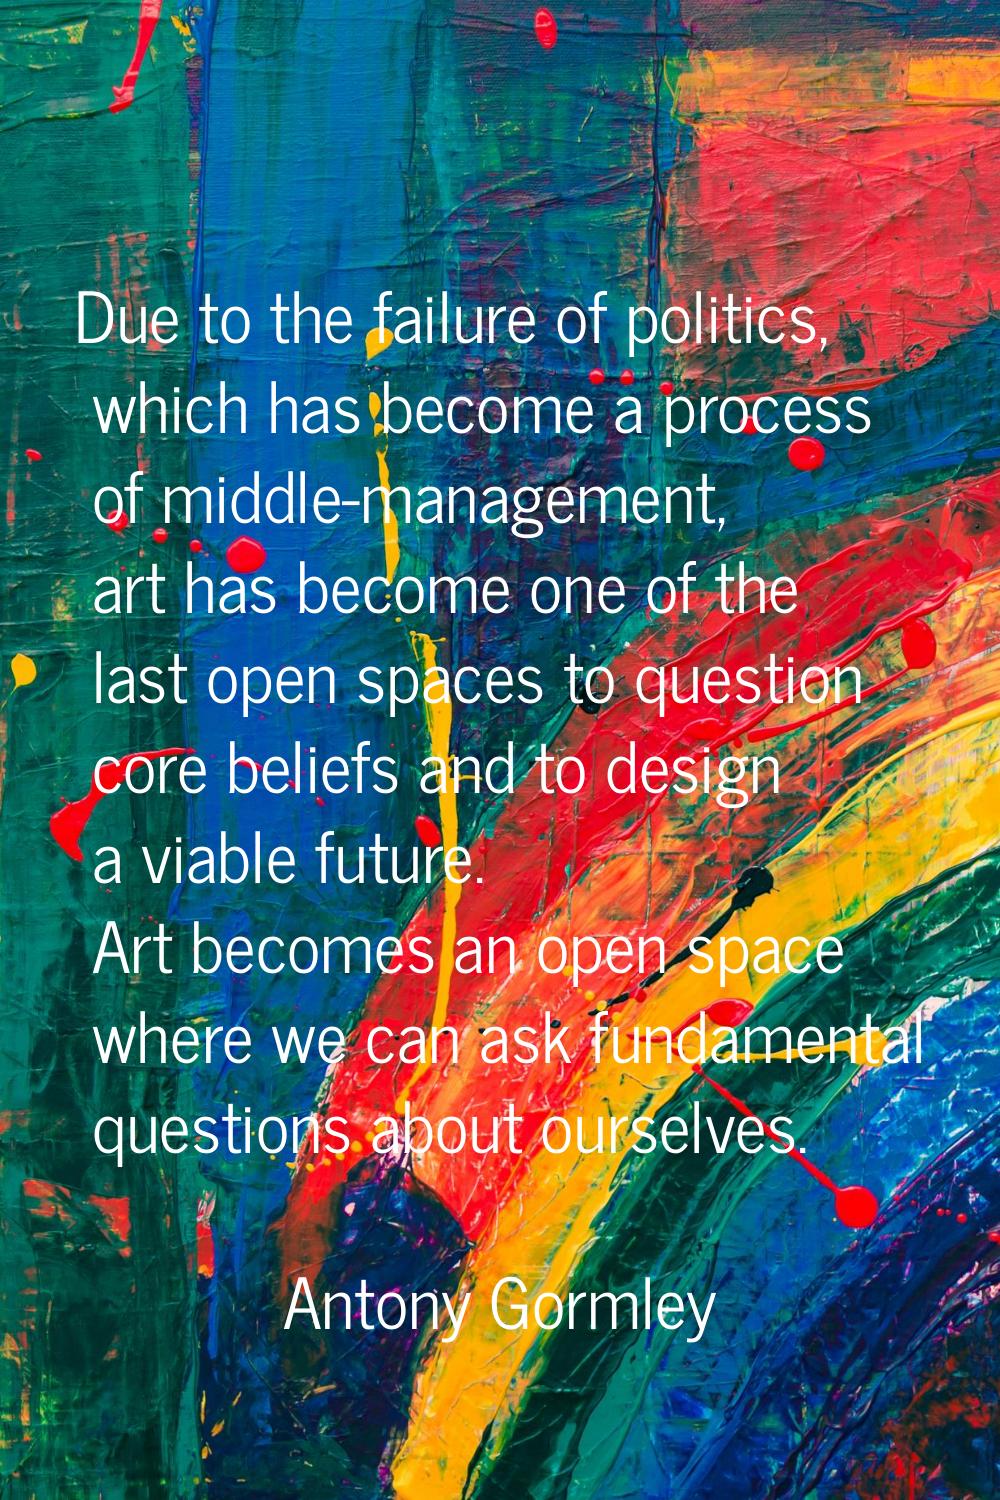 Due to the failure of politics, which has become a process of middle-management, art has become one